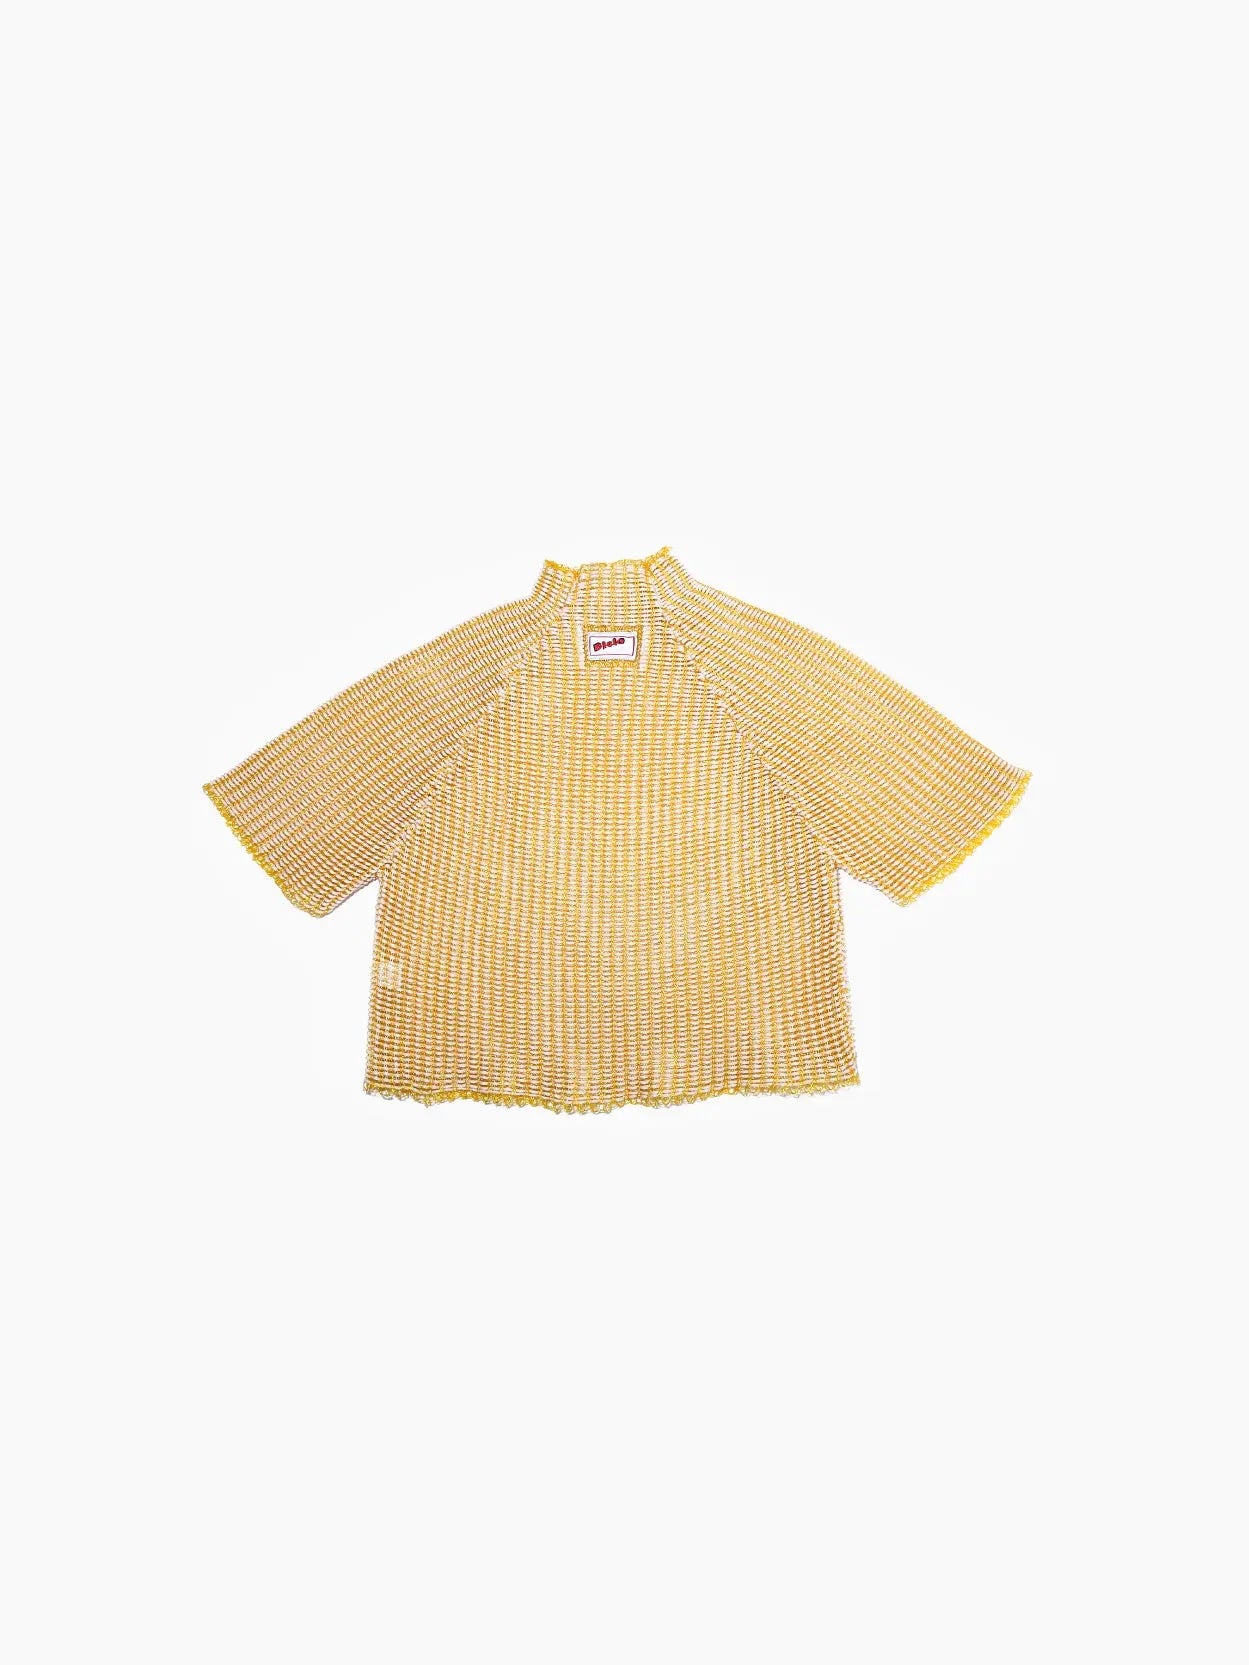 A Keya Sweater Yellow from Bielo with wide, short sleeves and a mock neck. The sweater features a loose, casual fit and a textured pattern. It is laid flat against a plain, white background.